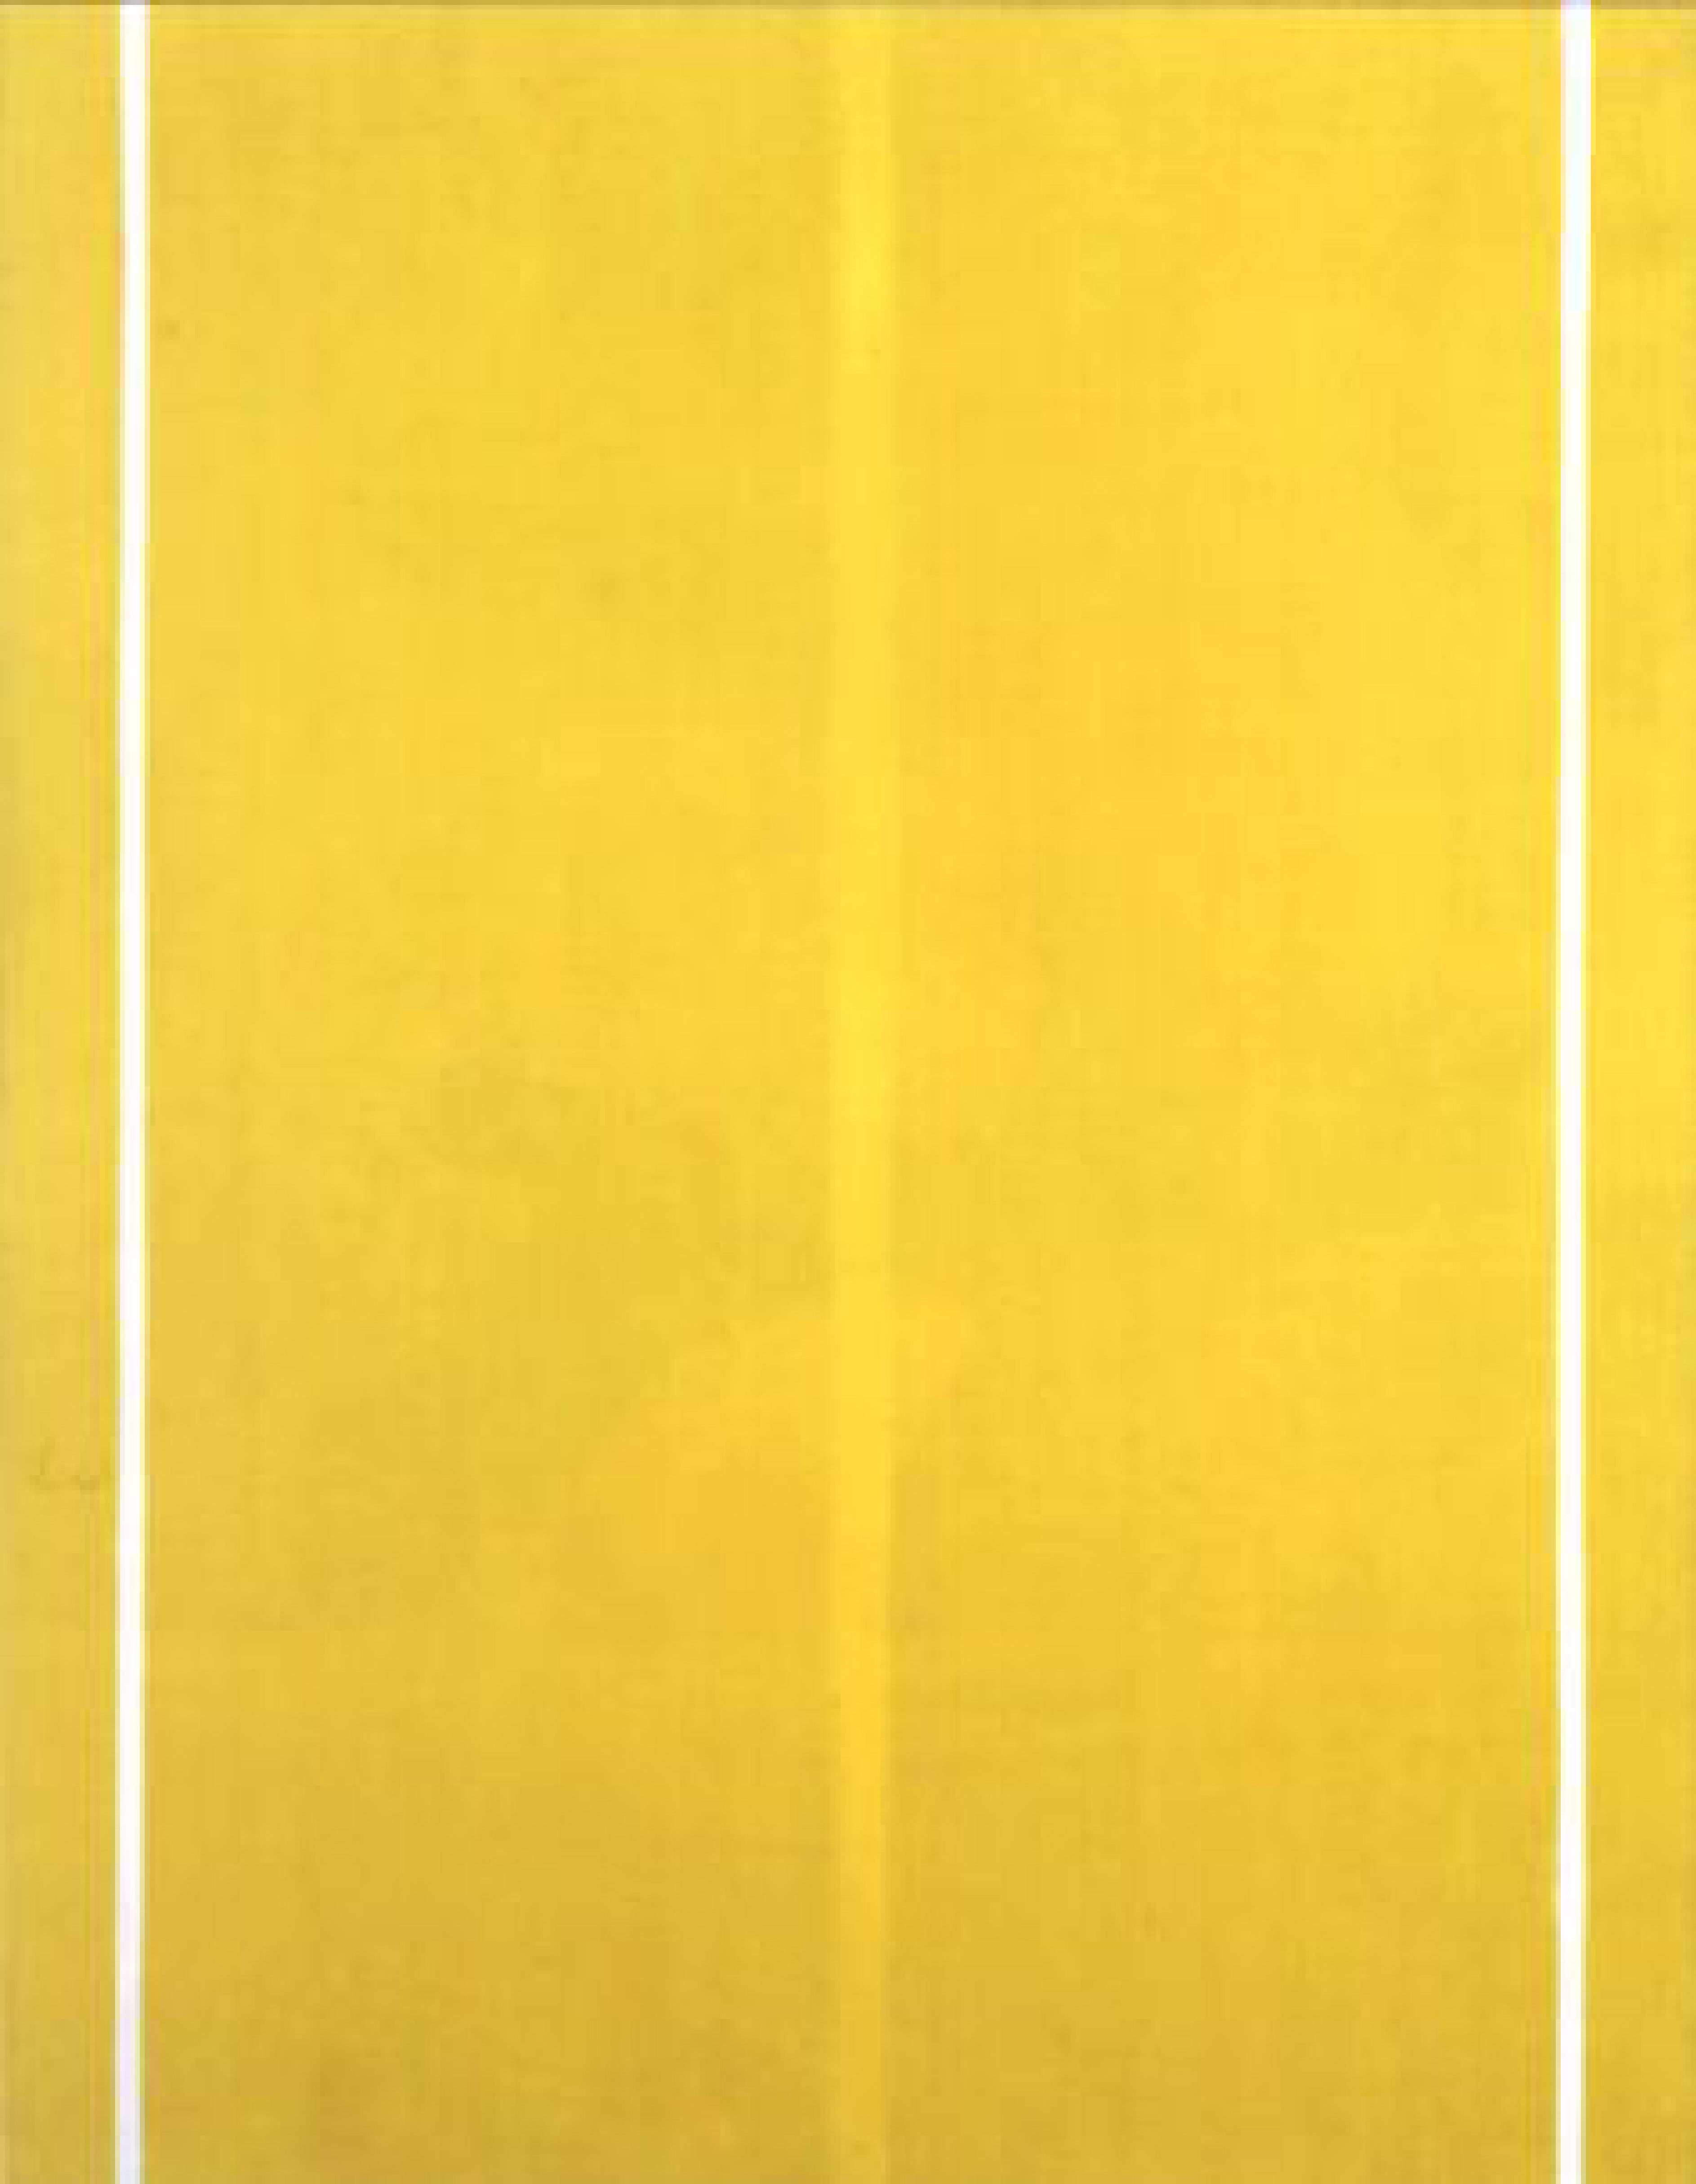 Yellow Painting, 1949, oil on canvas, 67 1/2 x 52 3/8 inches (171.4 x 133.1 cm) .737Ko/52,2Mo 